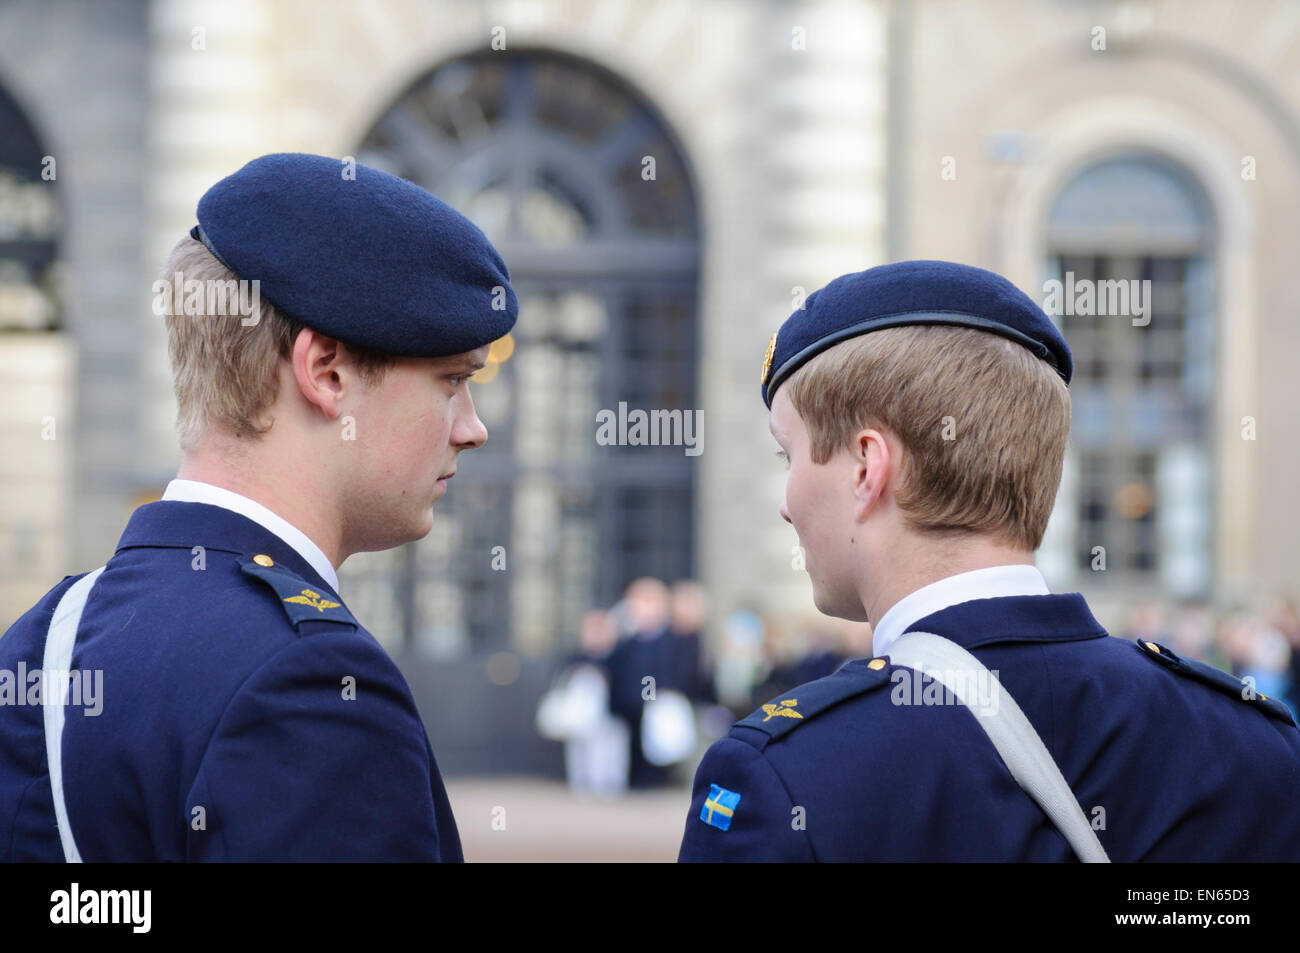 Guards / uniformed soldiers of the Swedish army outside the Royal Palace (Kungliga Slottet), Stockholm, Sweden. Military guards; uniform; conscripts Stock Photo